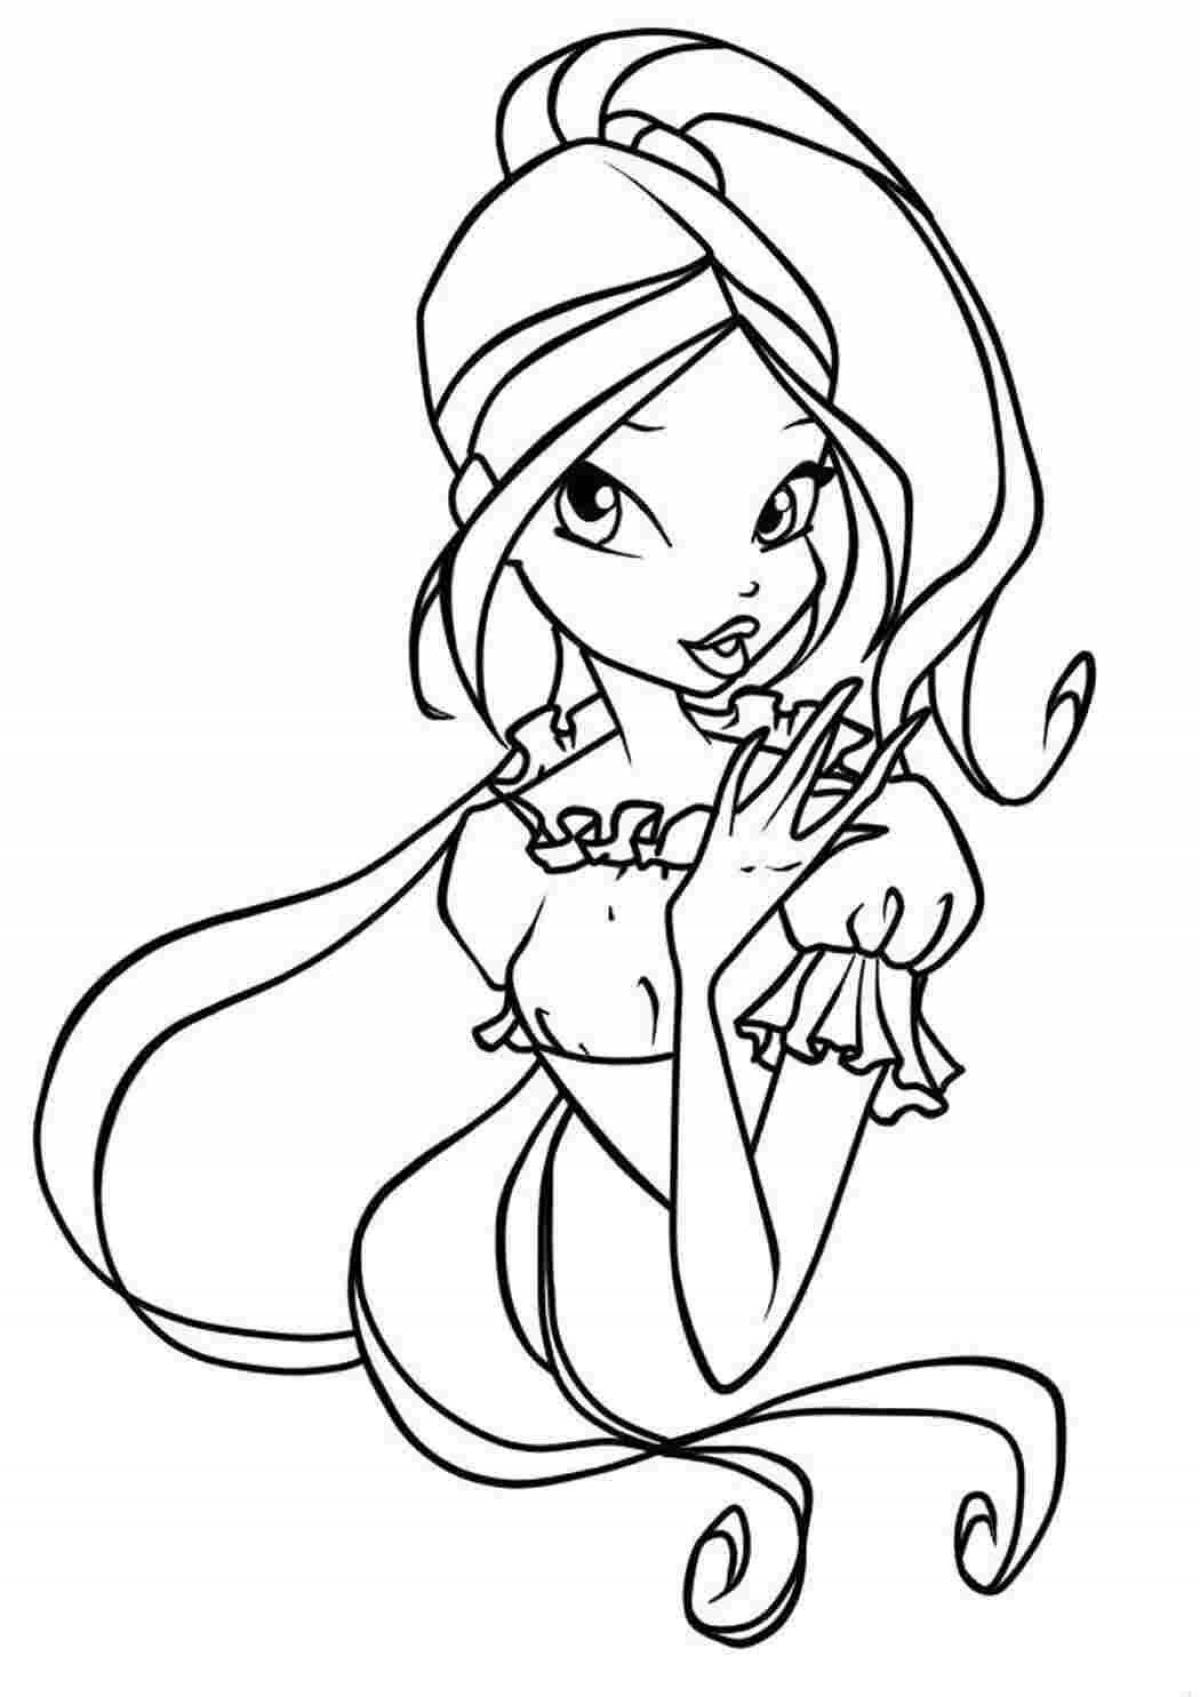 Adorable easy coloring pages for girls 8 years old